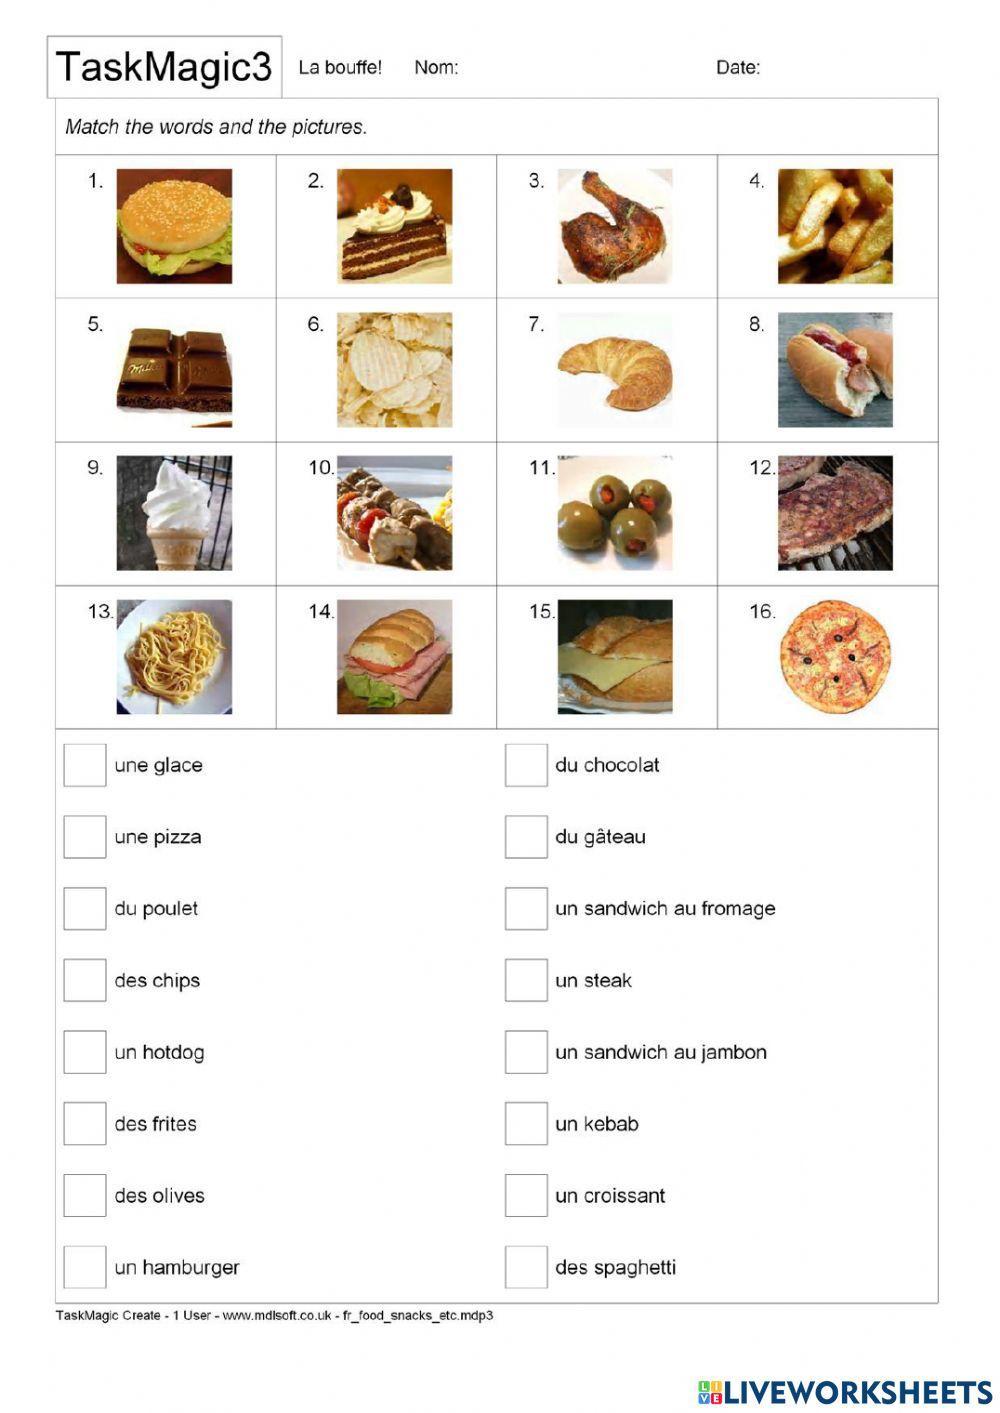 Food matching exercise